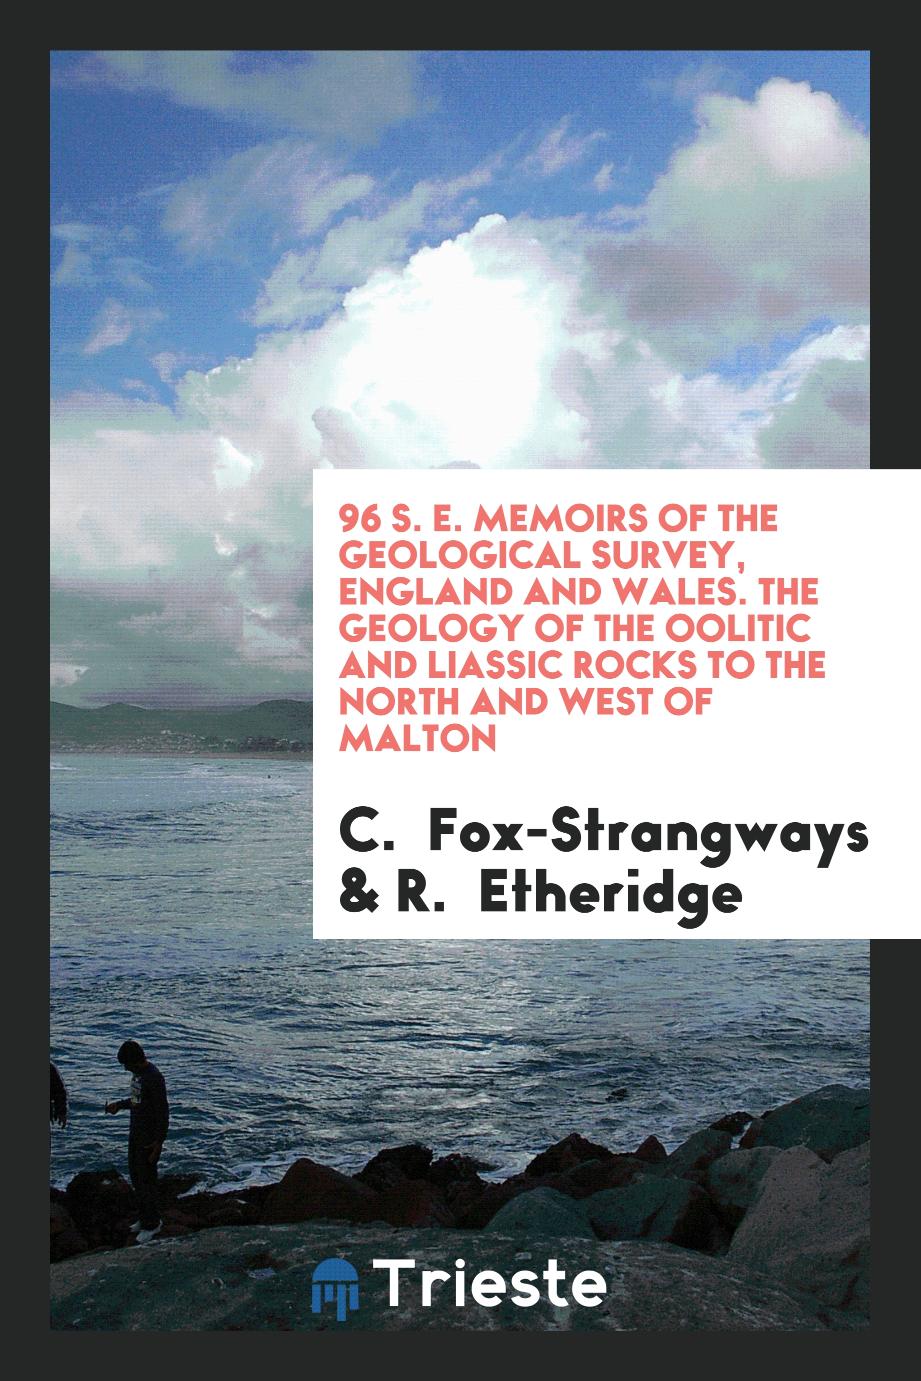 96 S. E. Memoirs of the Geological Survey, England and Wales. The geology of the oolitic and liassic rocks to the north and west of Malton